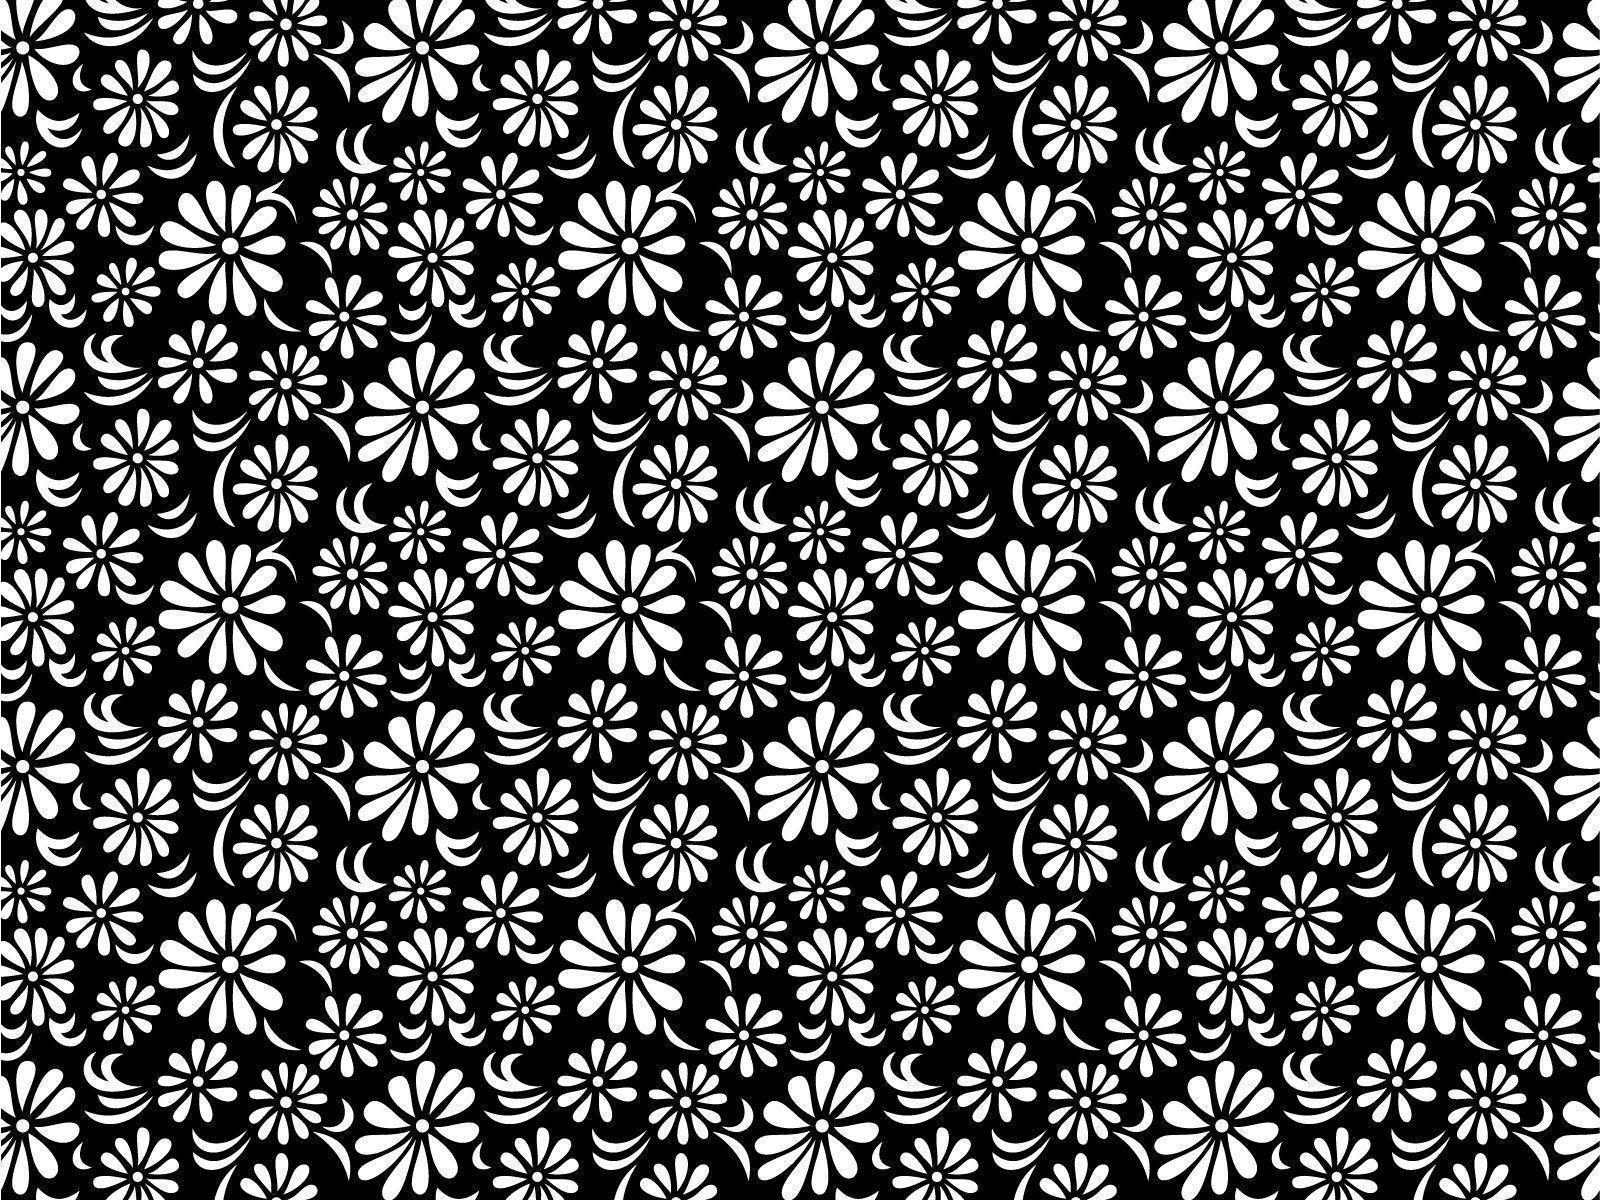 Black and White Floral 5176 1600x1200 px